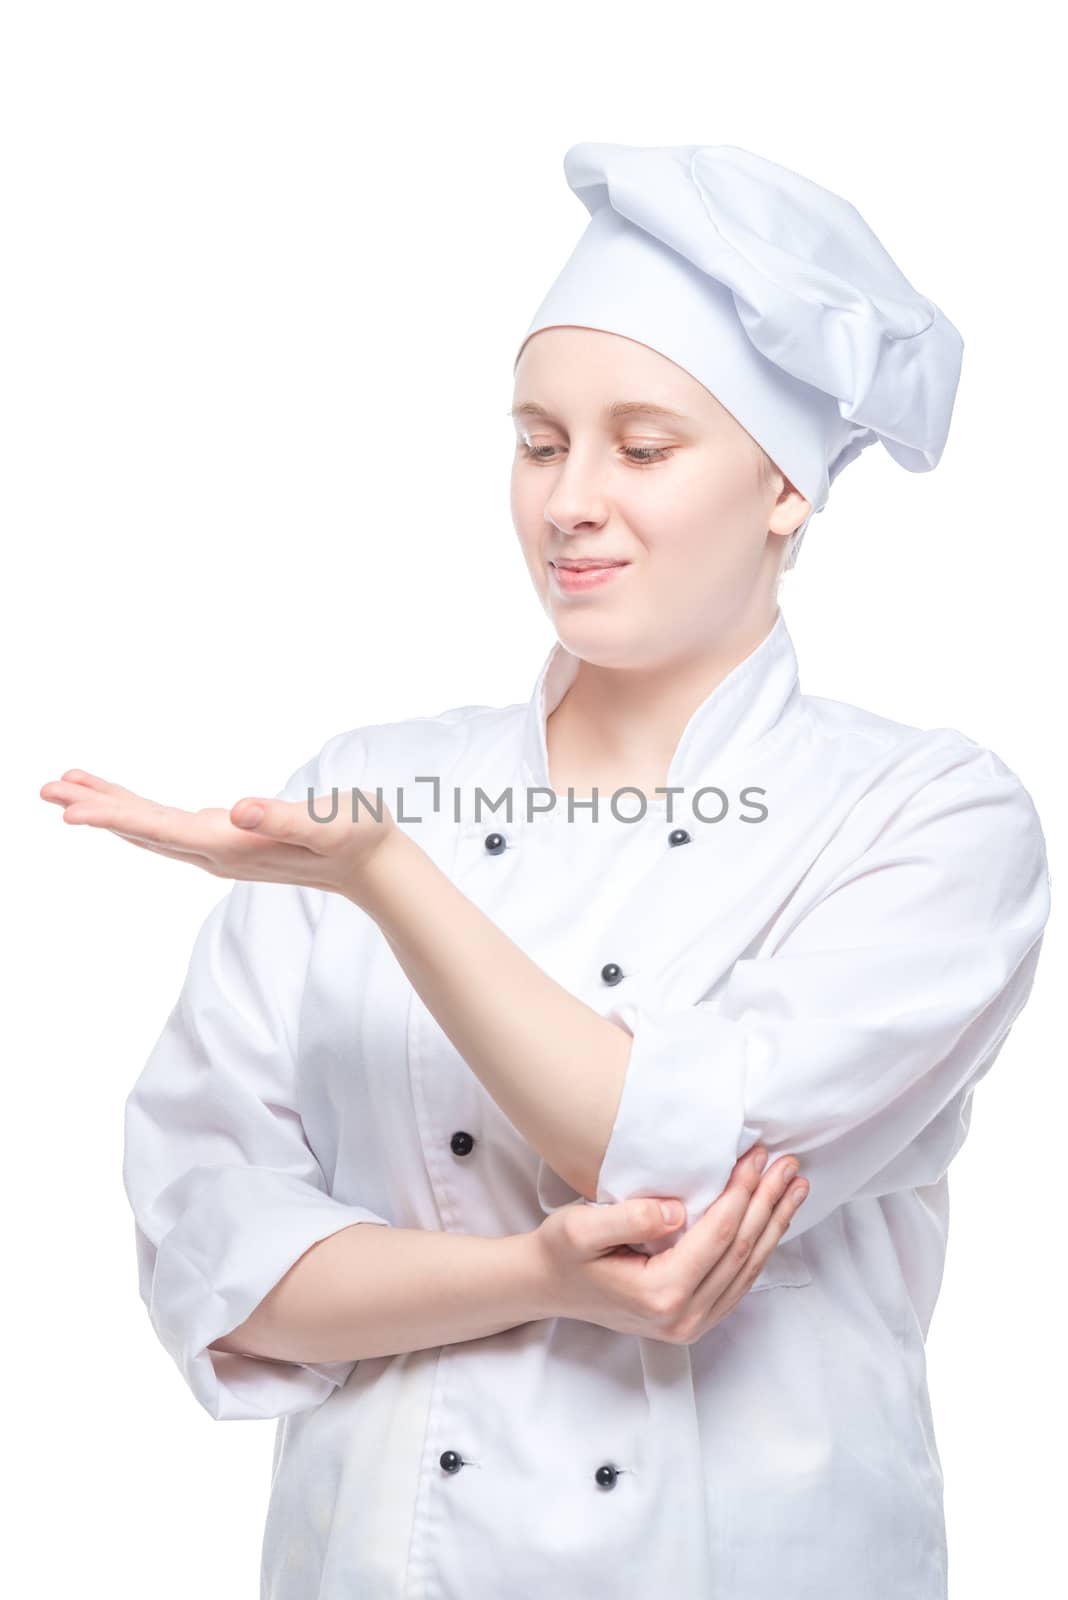 female cook looks at her empty palm, concept photo on white back by kosmsos111